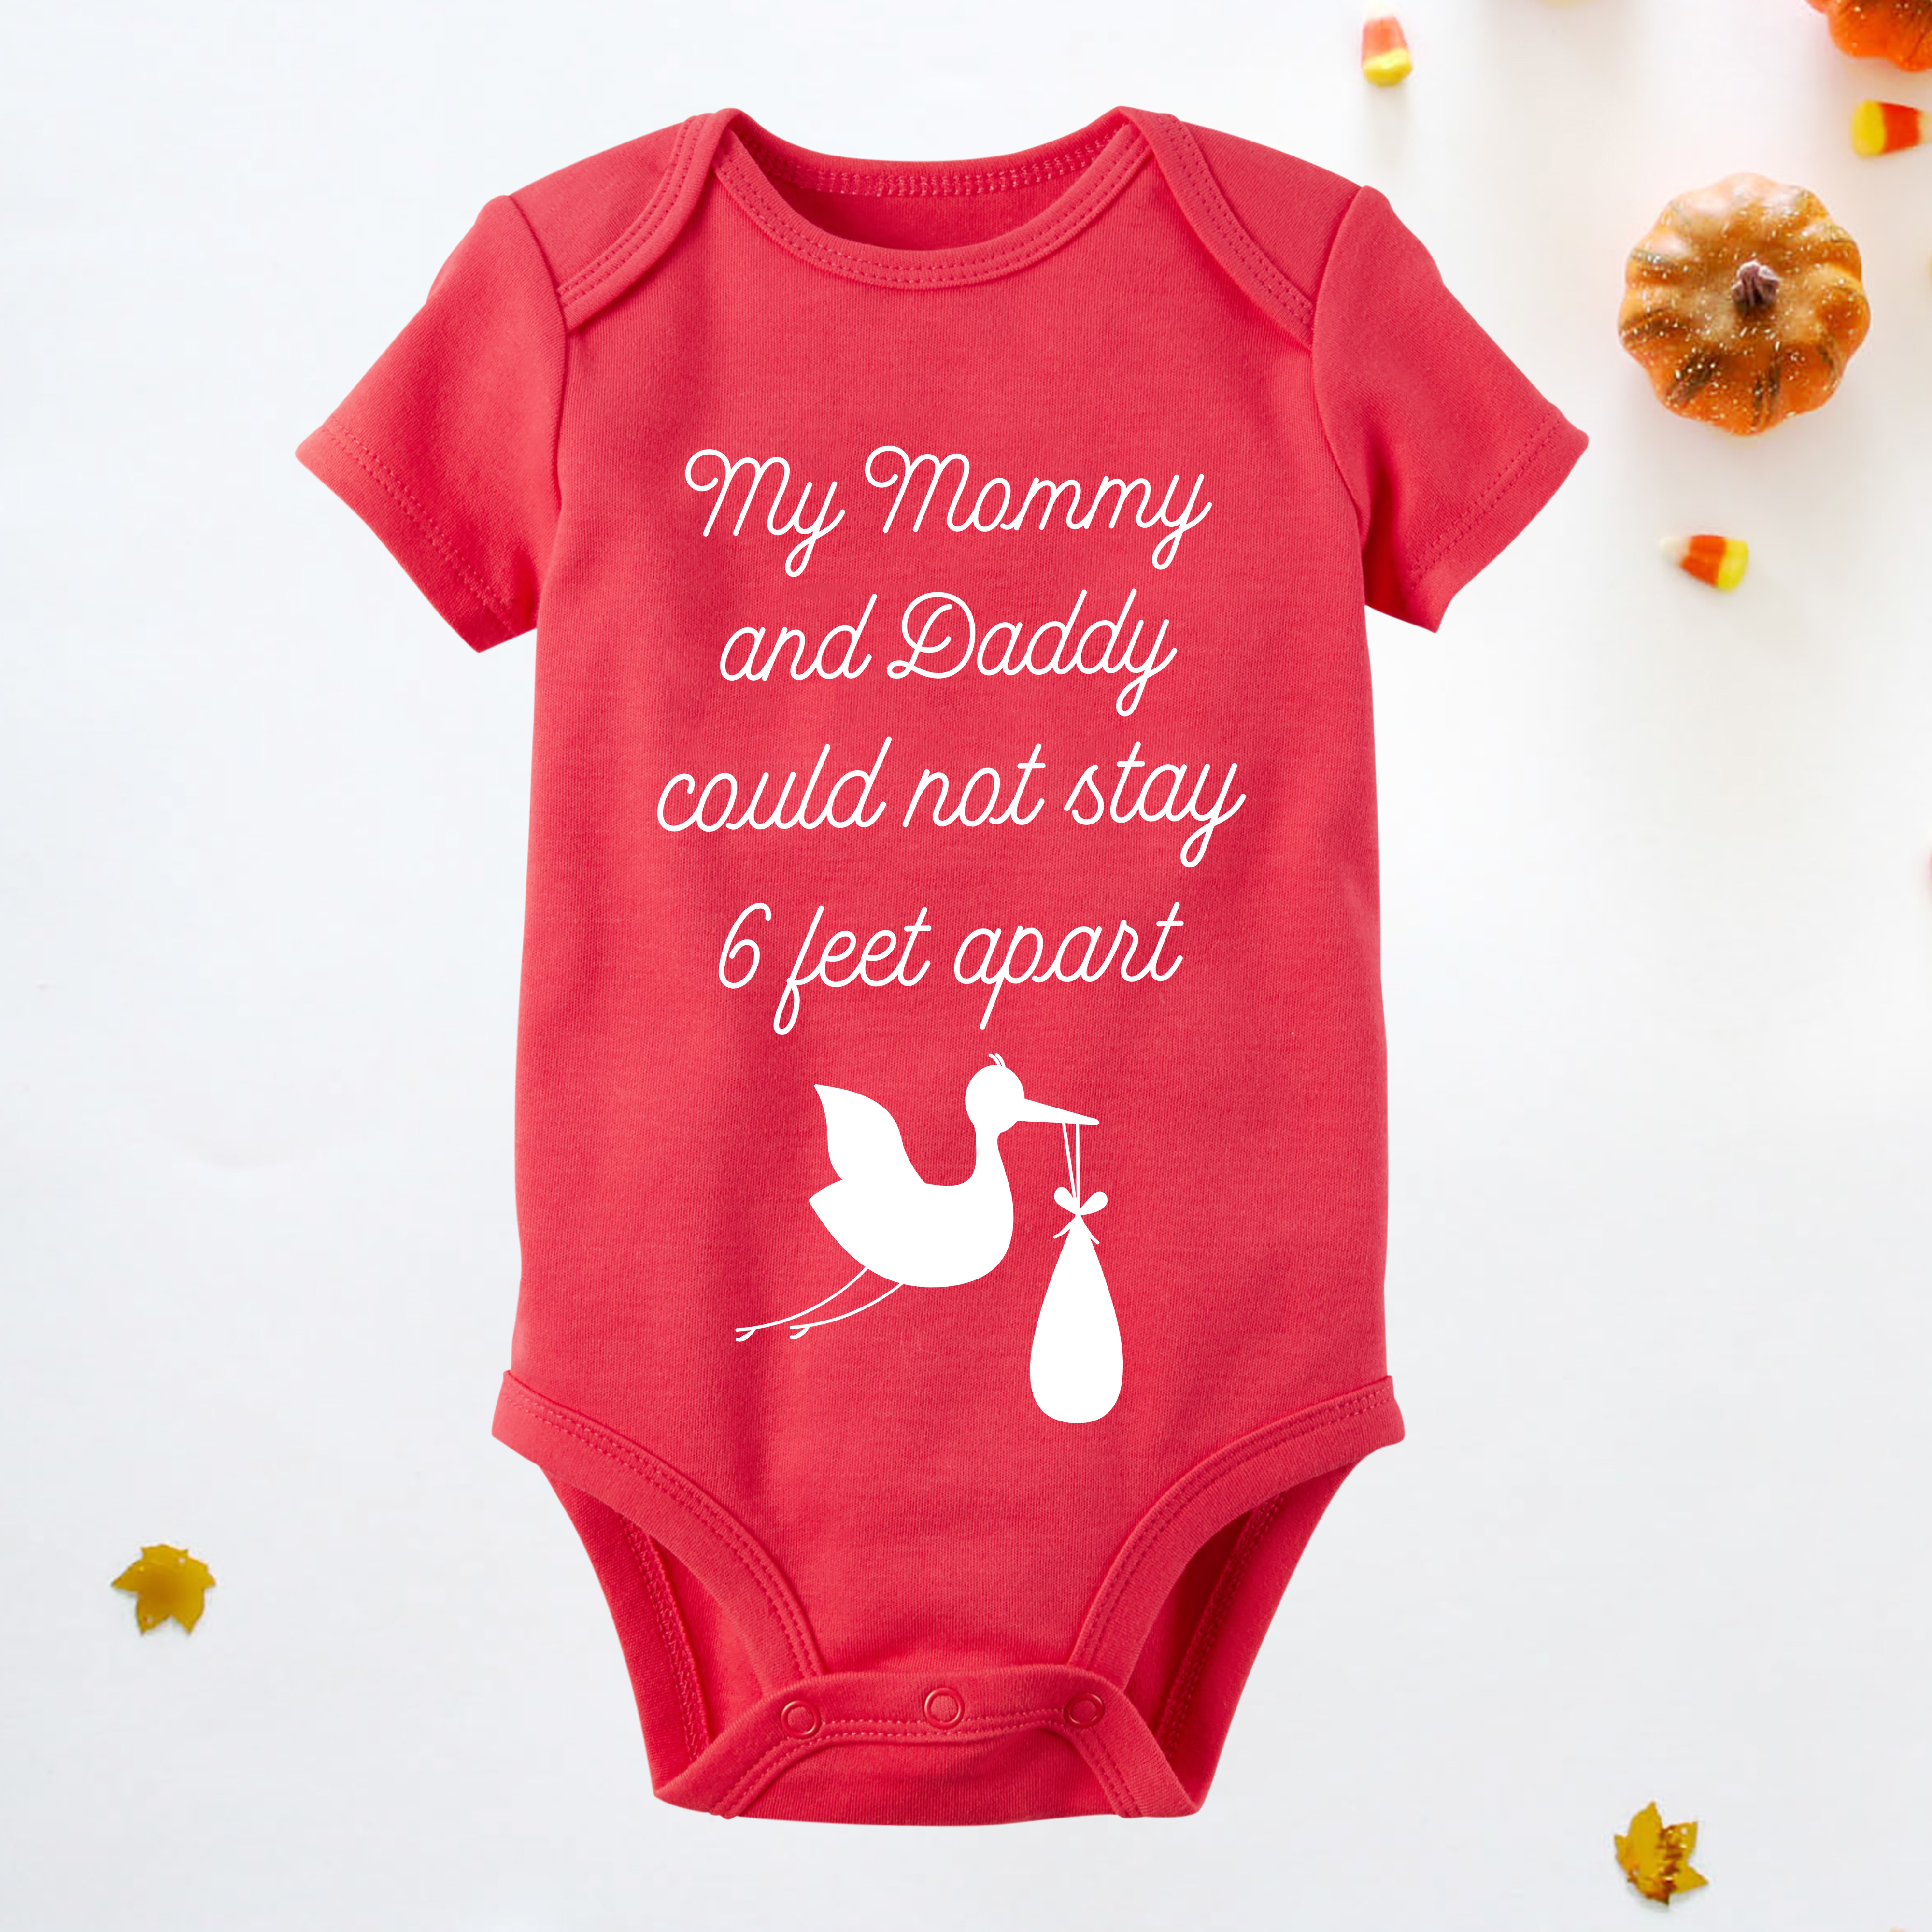 QUIT YOUR CRYING BABY ONESIE (6 MONTHS)